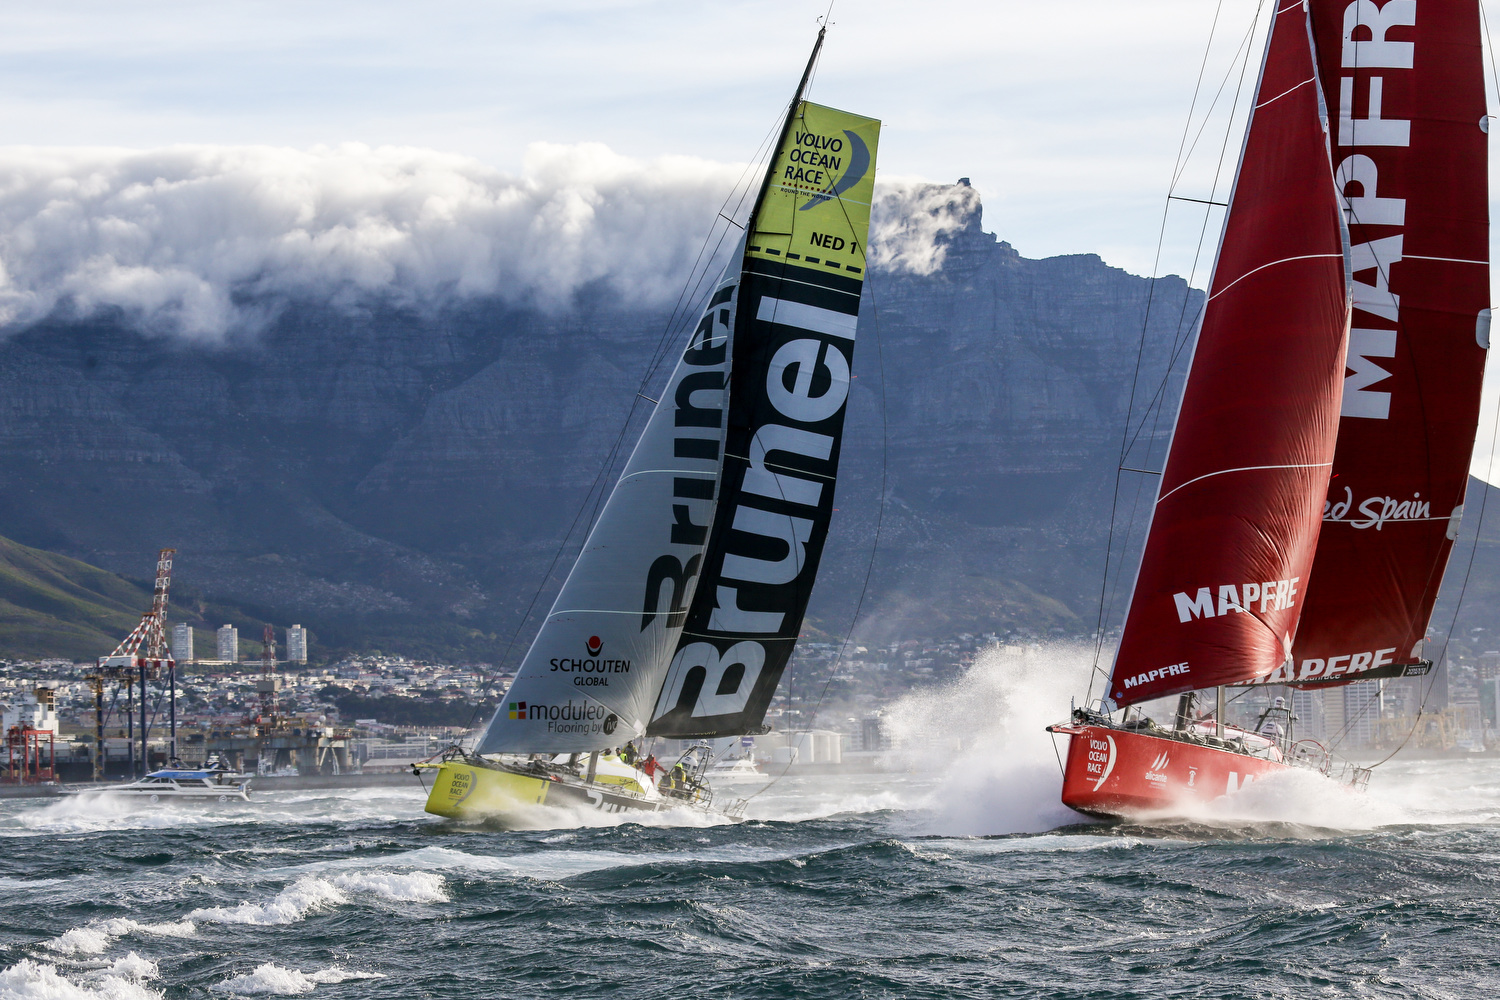 Team Brunel breeze out of Cape Town in the Volvo Ocean